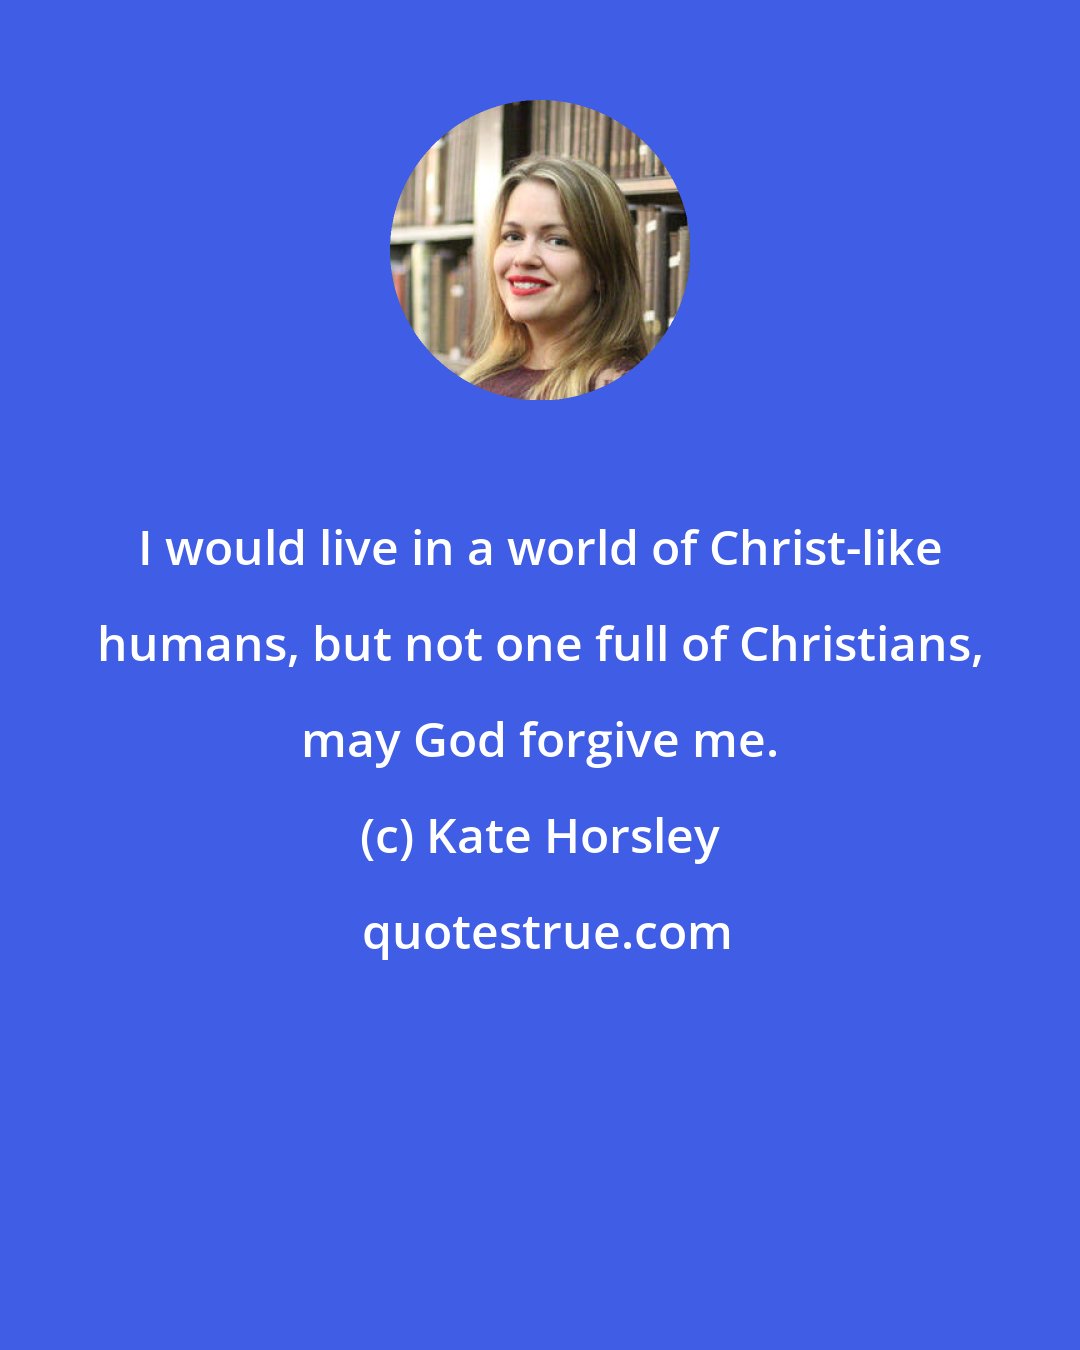 Kate Horsley: I would live in a world of Christ-like humans, but not one full of Christians, may God forgive me.